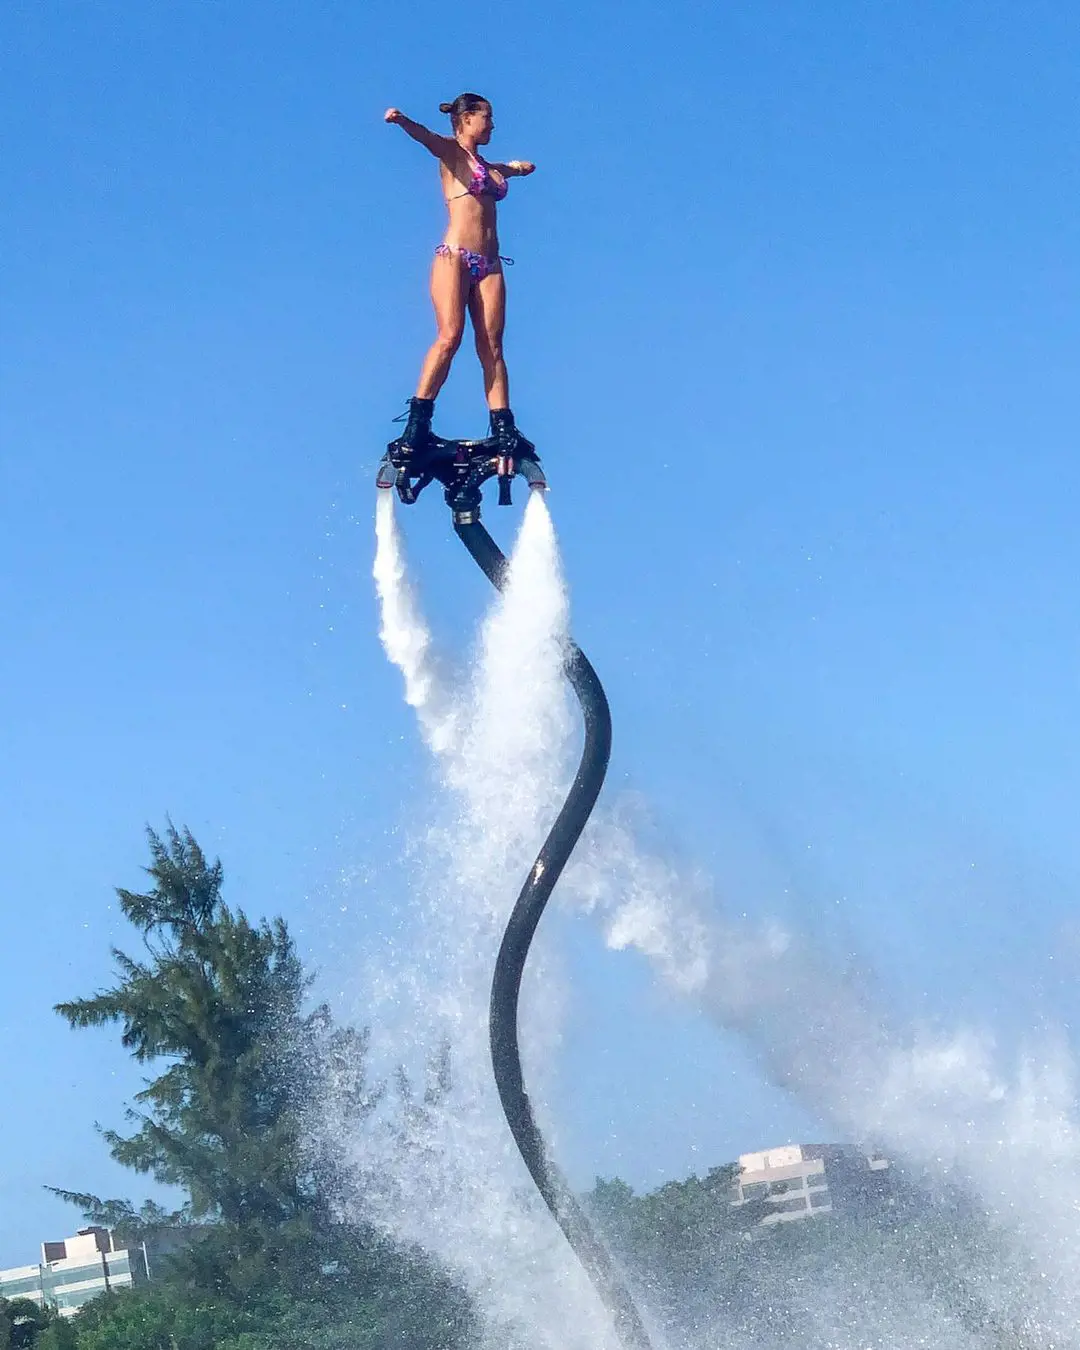  Flyboarding is a new kind of sports taking hype in the sunshine state